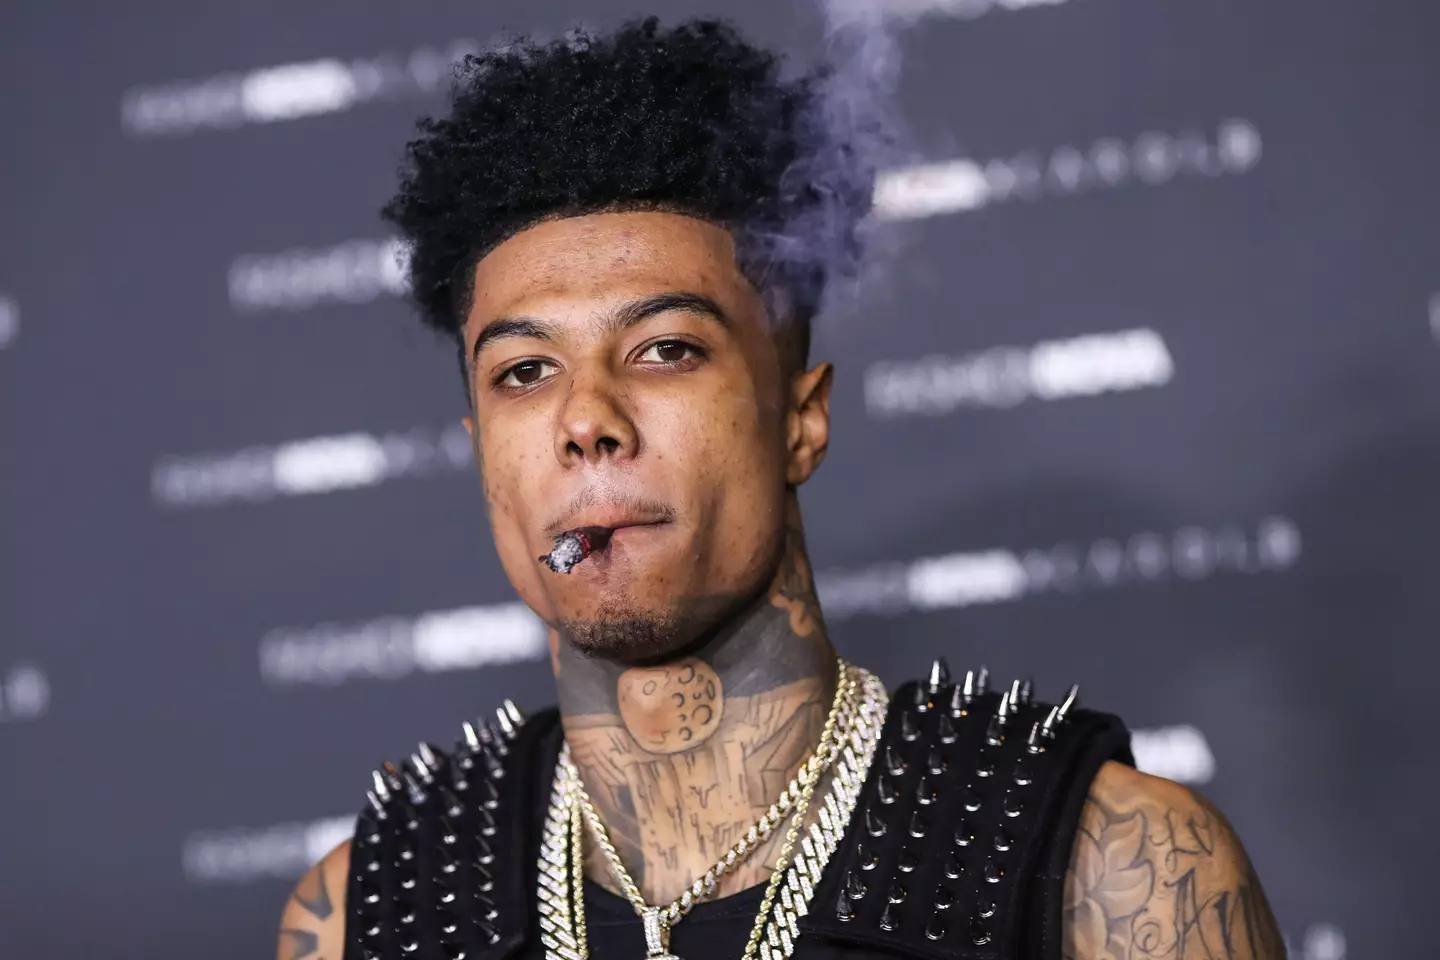 Blueface has reportedly been arrested for attempted murder.